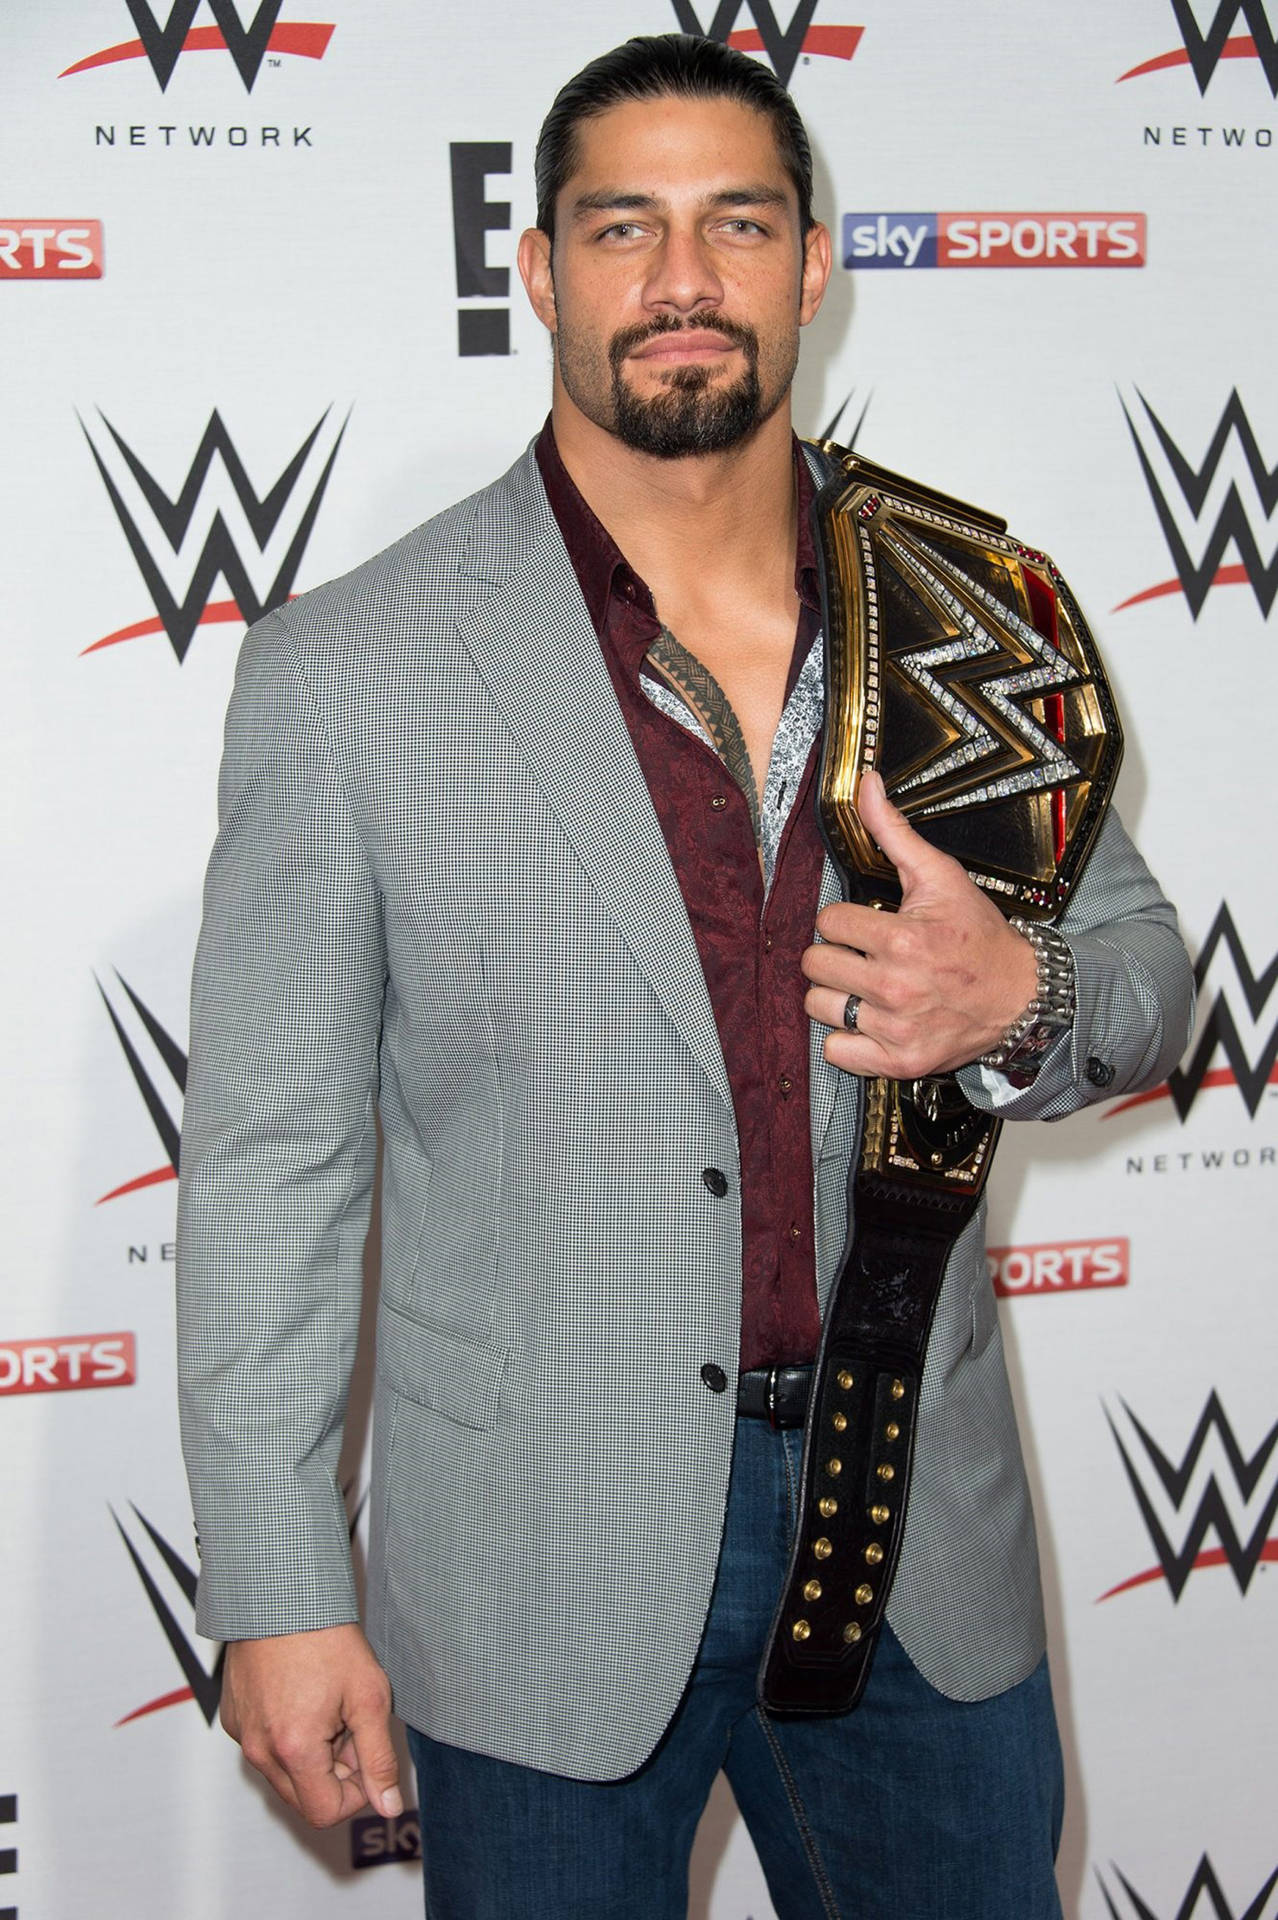 Wwe Superstar Roman Reigns On Raw Red Carpet Background